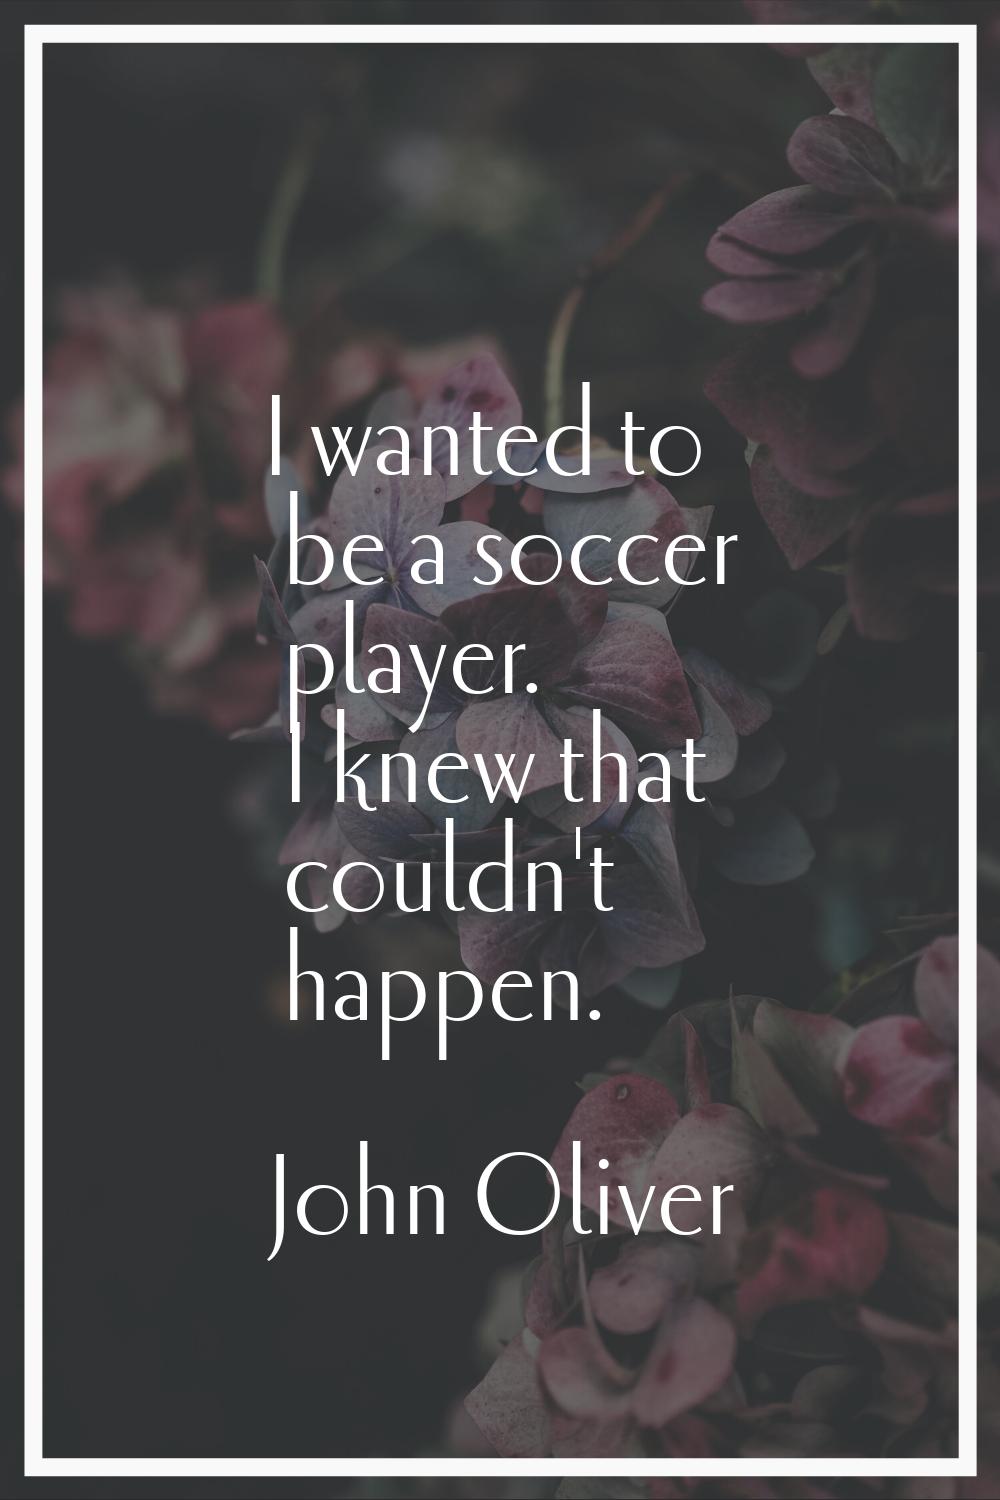 I wanted to be a soccer player. I knew that couldn't happen.